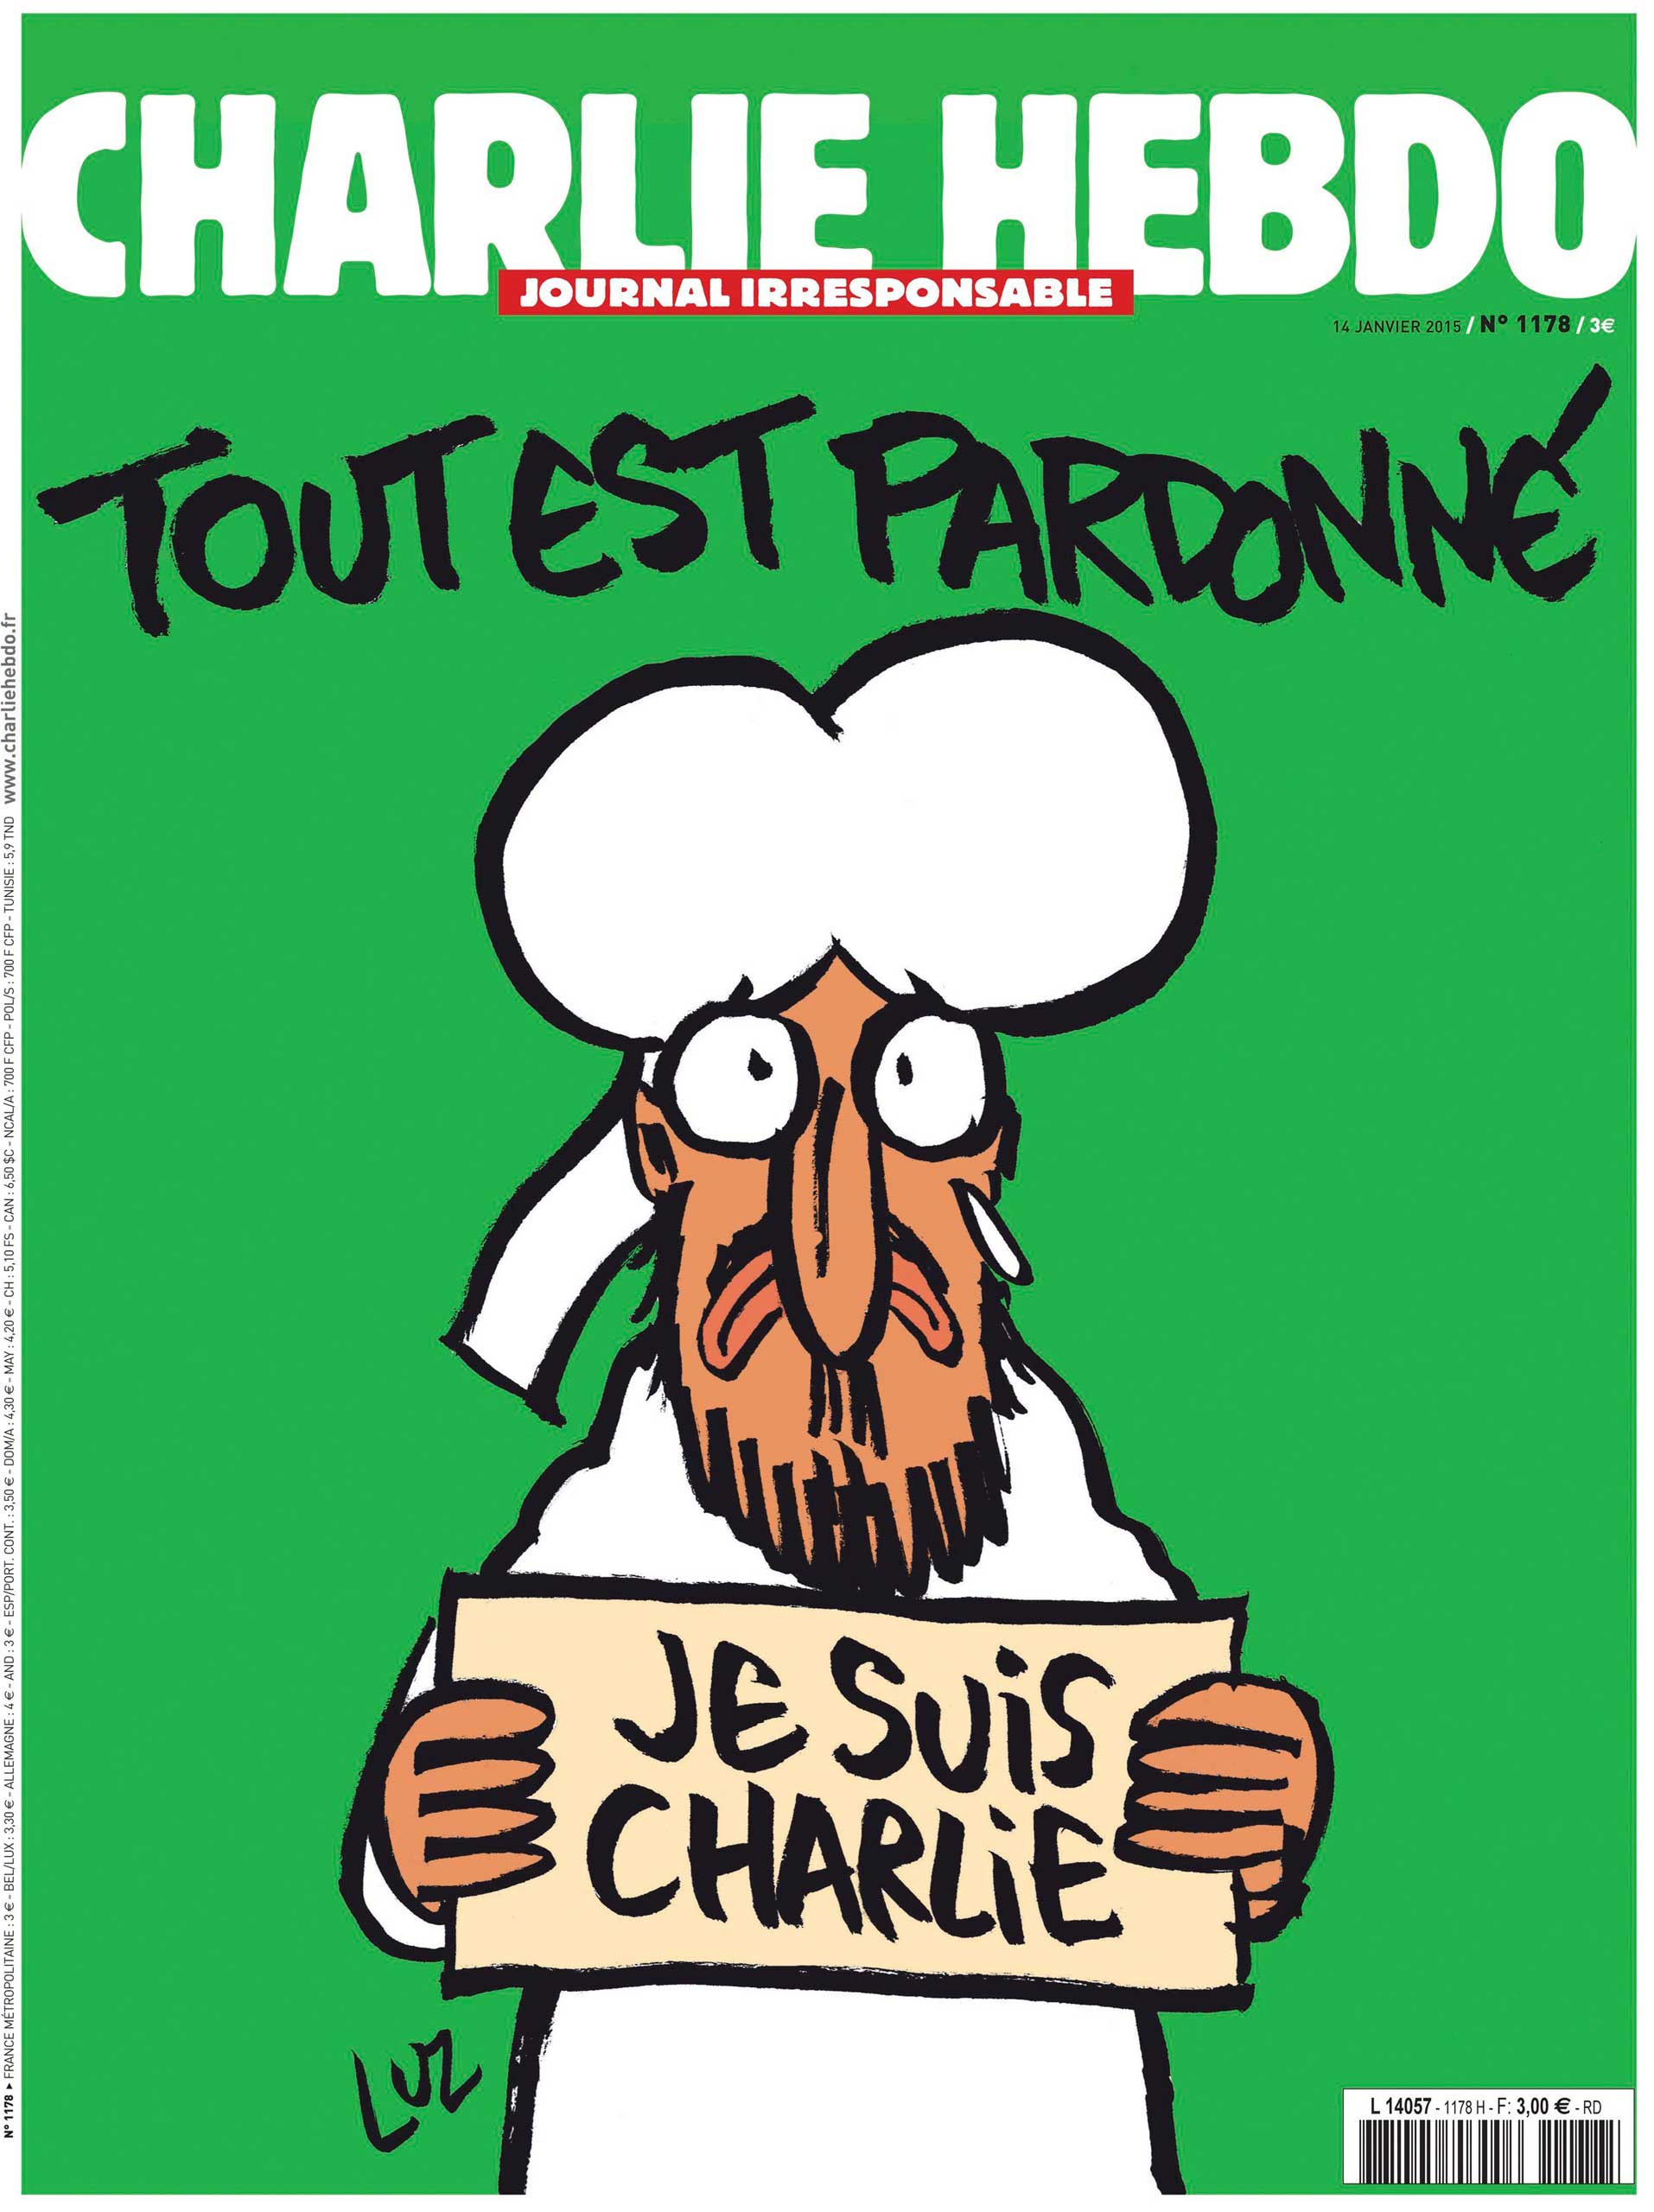 The new cover of satirical weekly Charlie Hebdo.